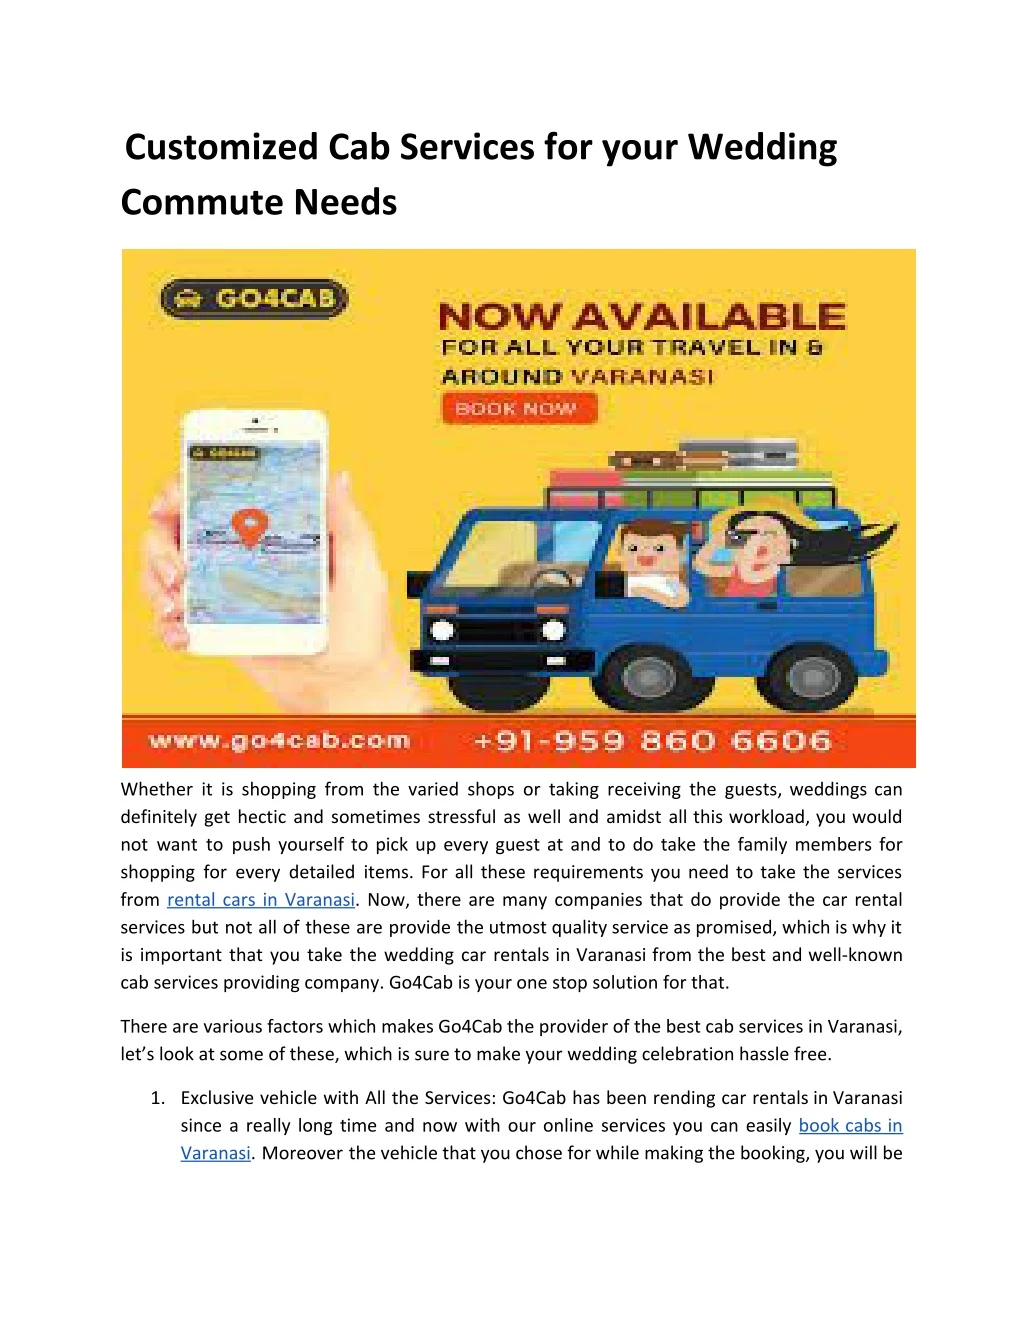 customized cab services for your wedding commute